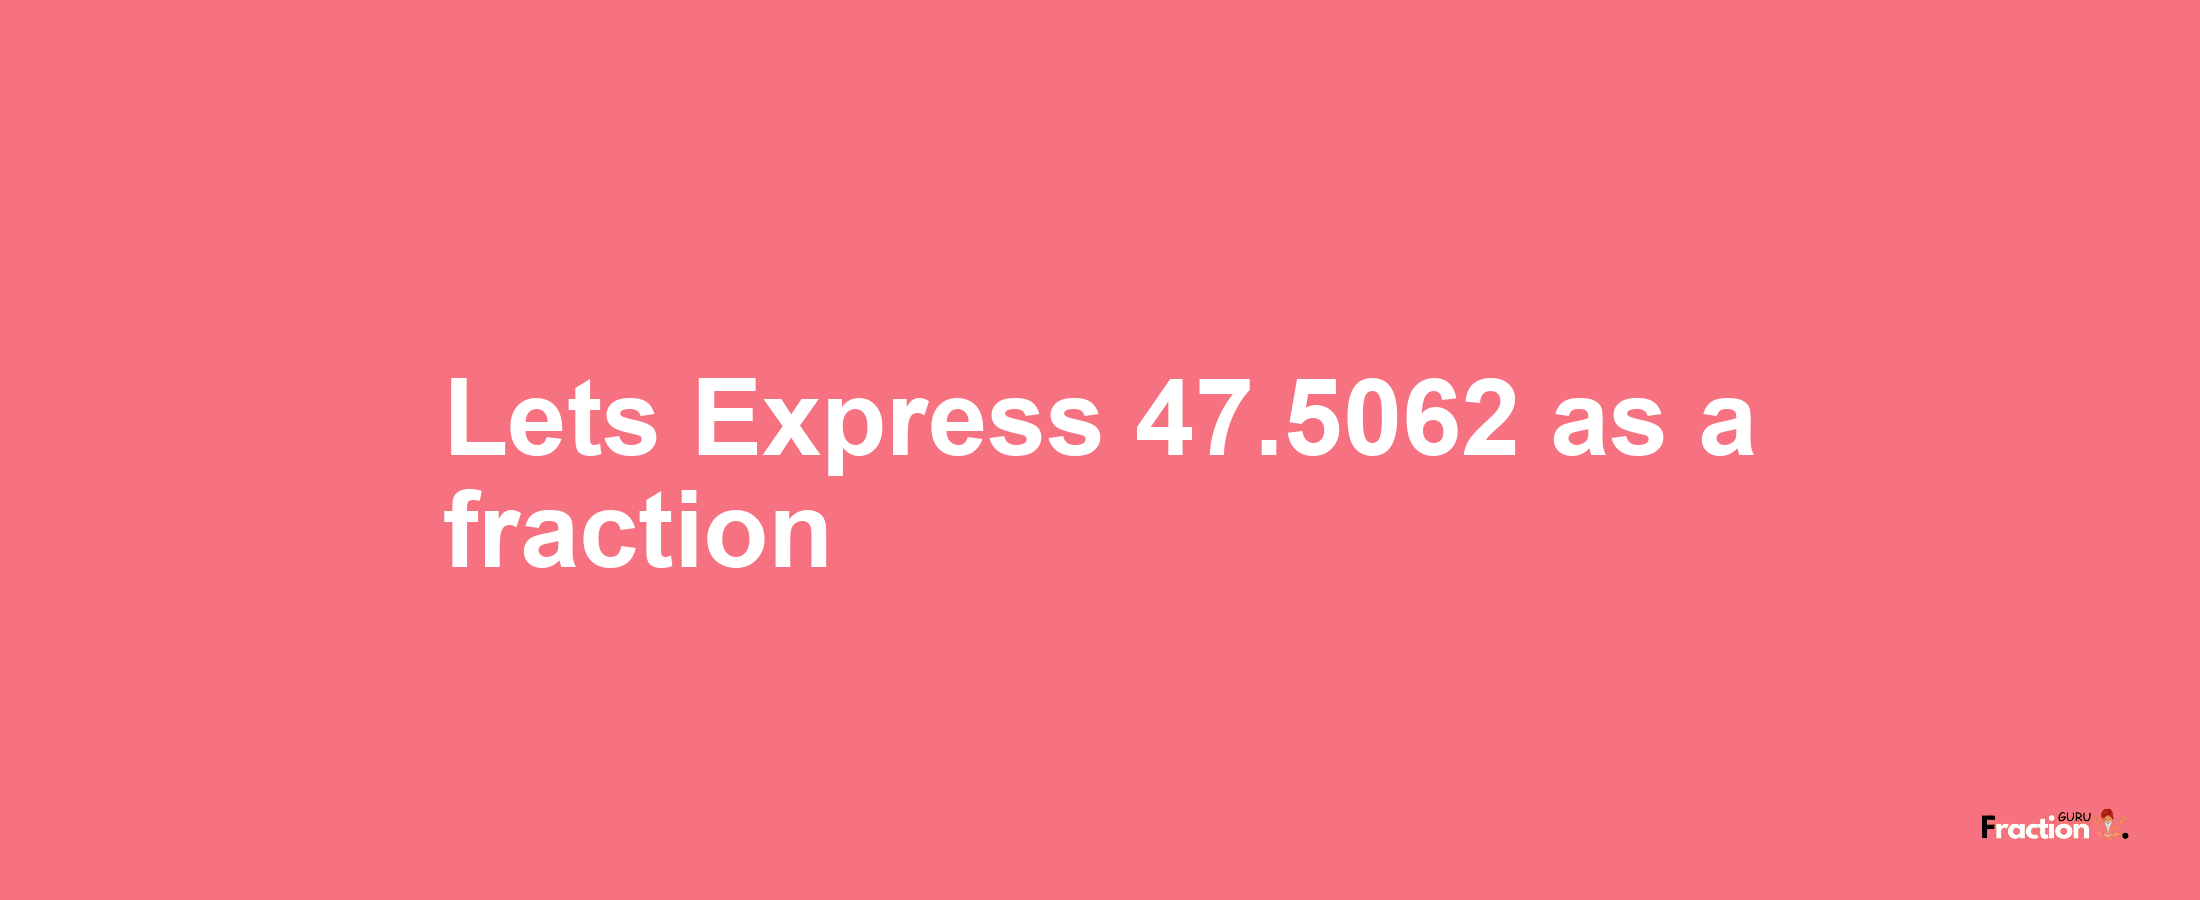 Lets Express 47.5062 as afraction